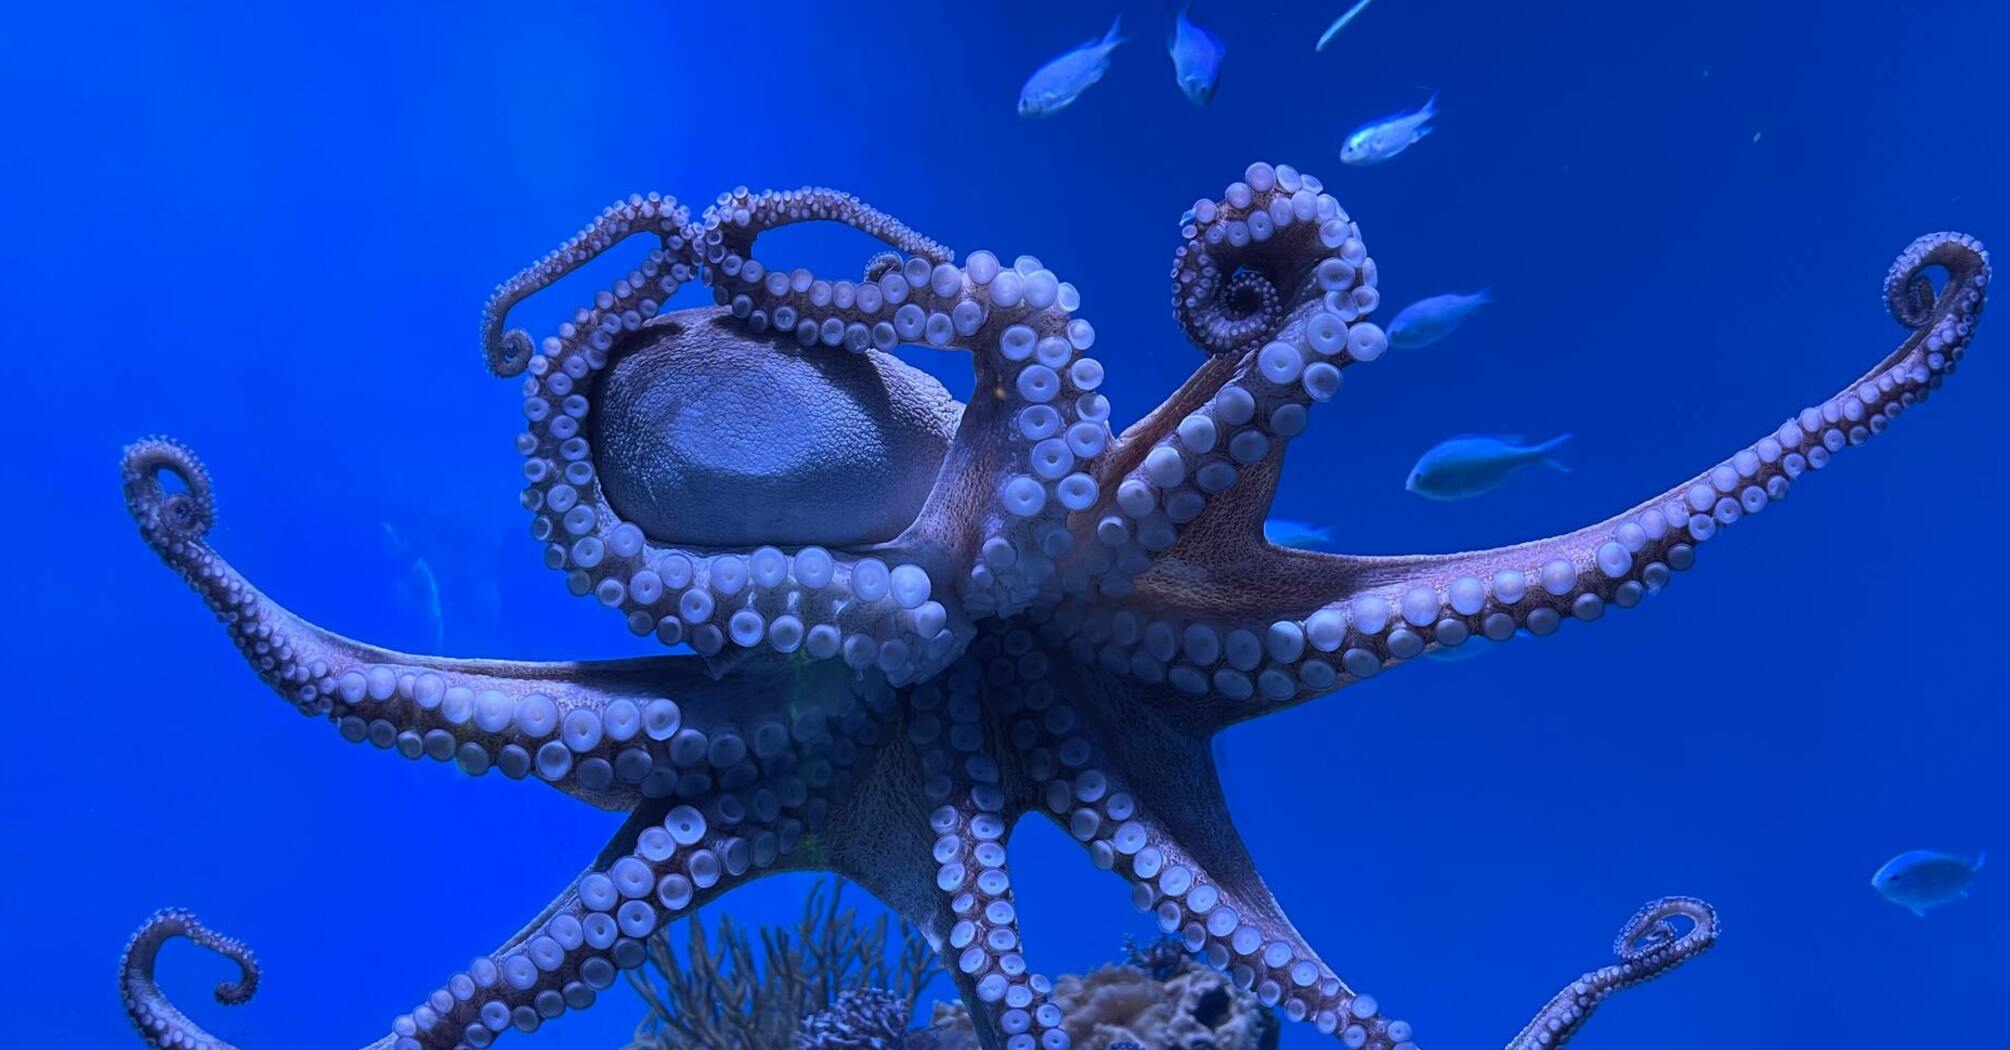 In France, an octopus stole a camera and started filming a diver (funny video)